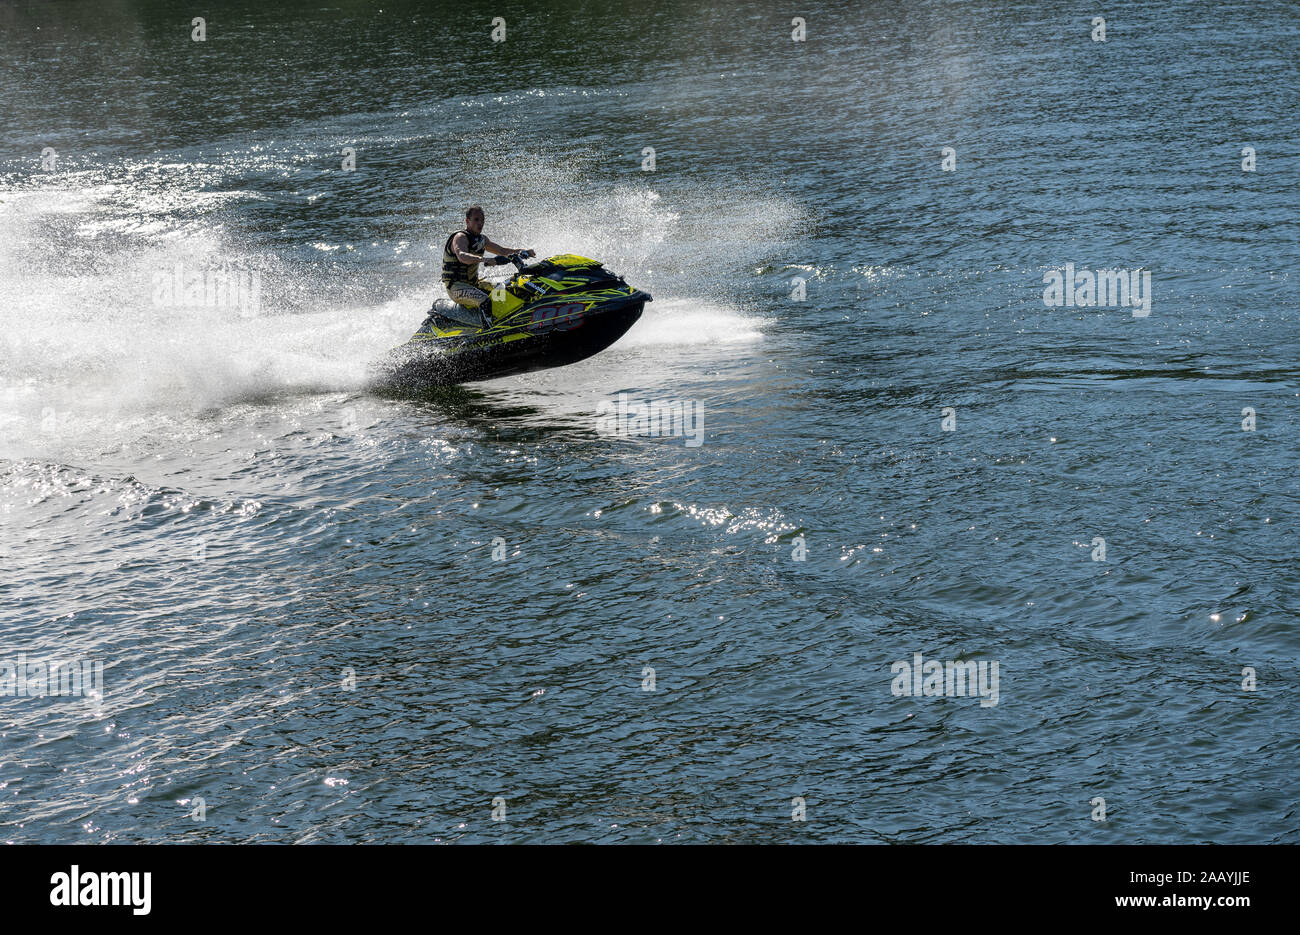 Praia Fluvial Bitetos, Portugal - 17 August 2019: Sea Doo watercraft rider in the river by the Bitetos beach in Douro valley Stock Photo